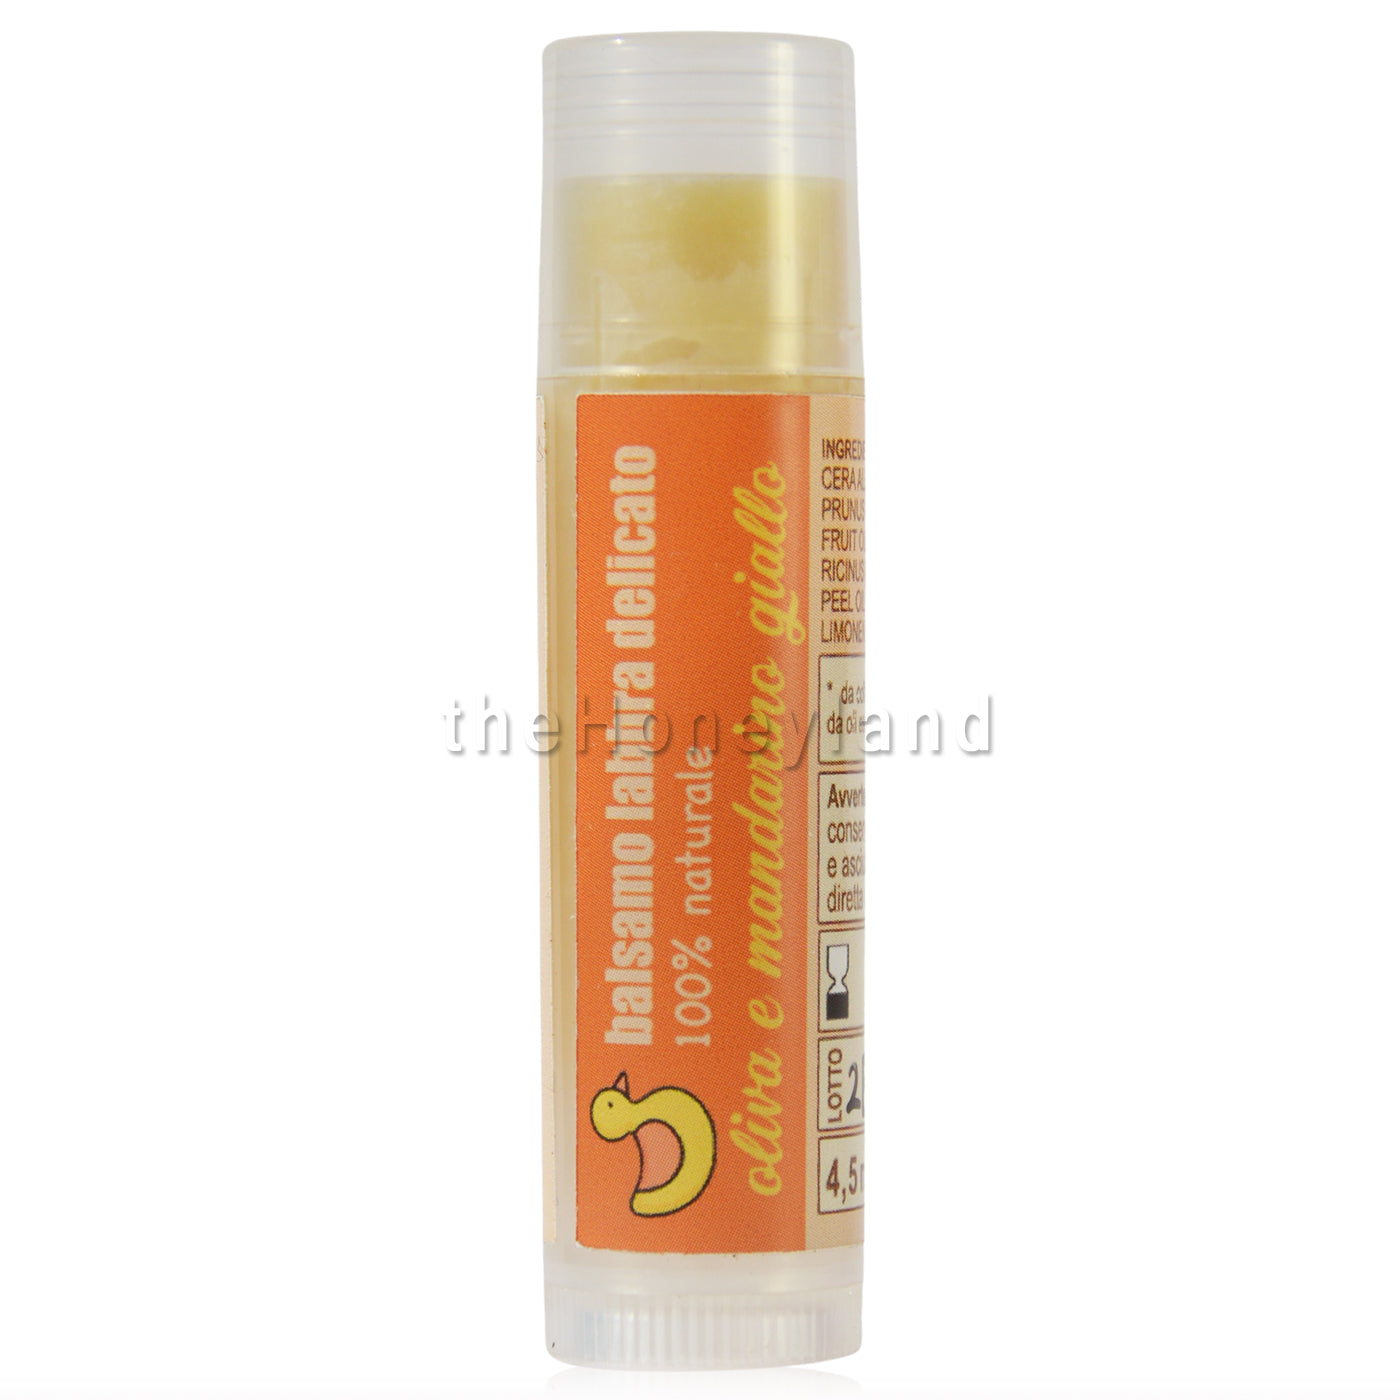 Lip balm with organic beeswax, extra virgin olive oil and Sicilian mandarin